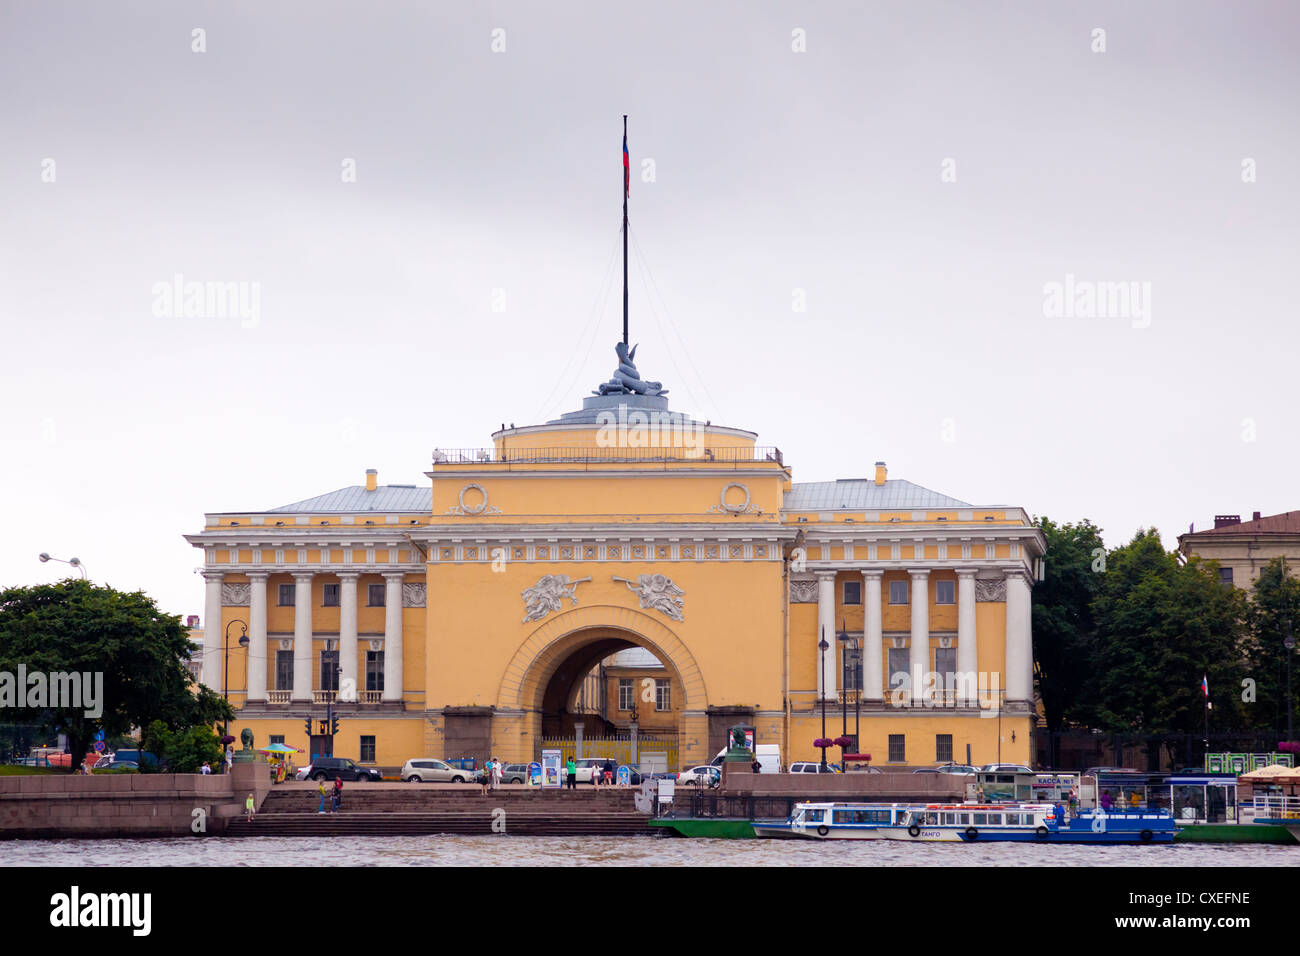 St Petersburg, Russia, Admiralty Building along the Neva River Stock Photo